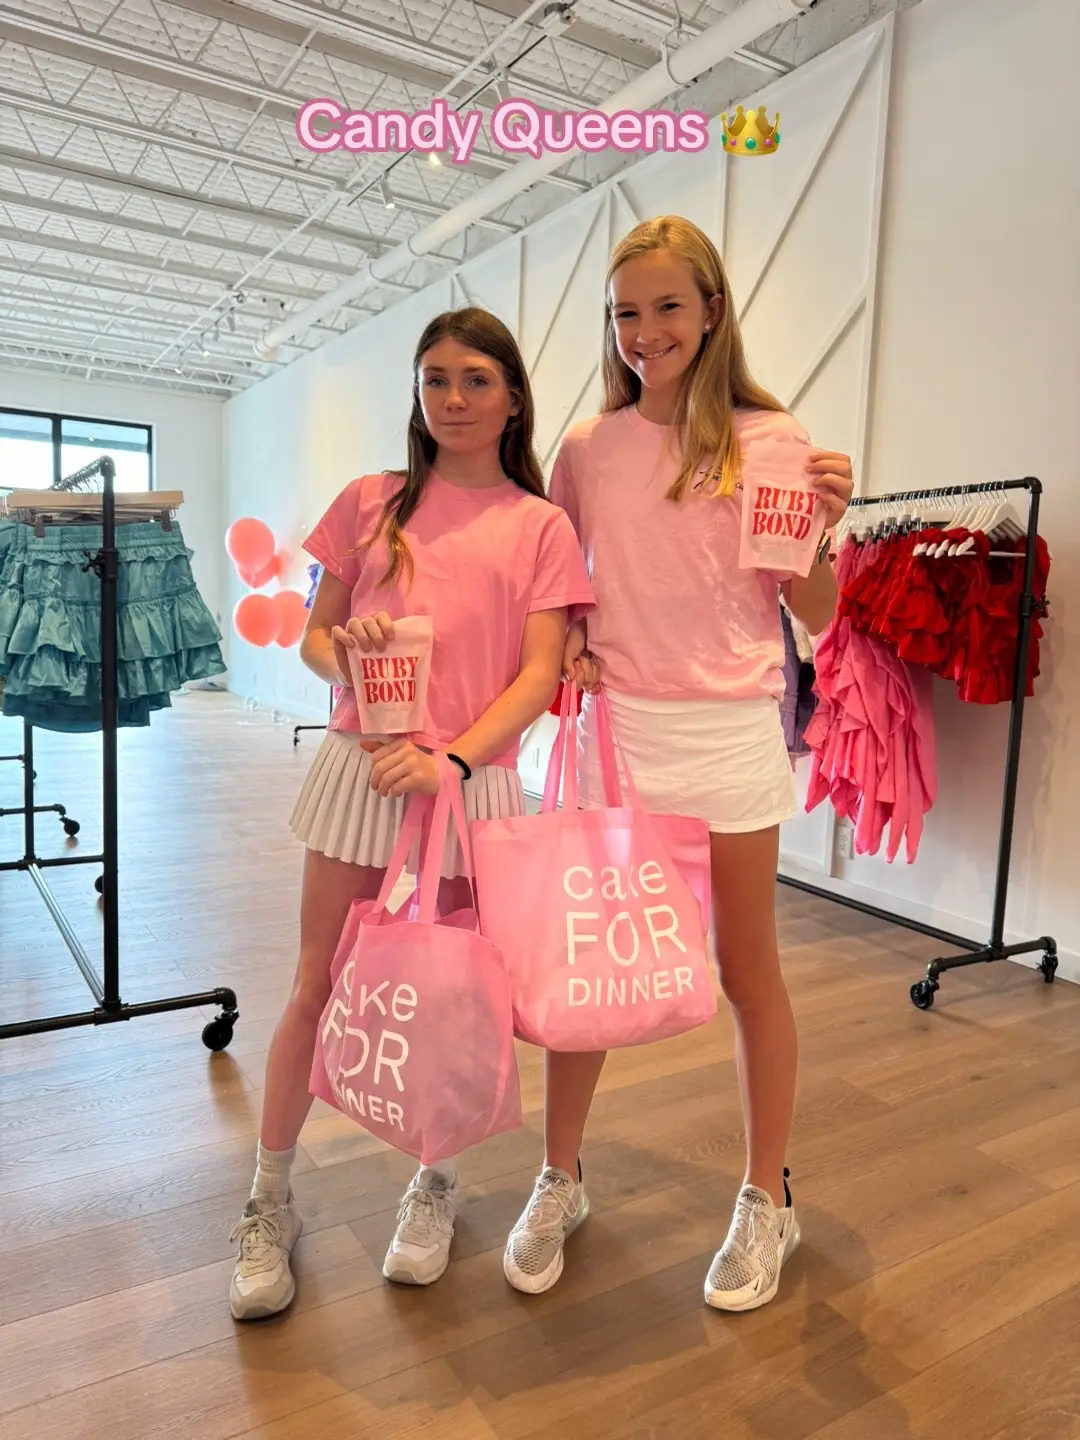 📸 from our Buckhead popup 🍭🍒🍬👑💖 It was the sweetest day! Thank you to everyone who came by 🥰 xoxo #rubybond #candy #candybag #candybags #sweettooth #pinkaesthetic #cakefordinner #buckhead #atl #atlanta #bestie #bff #tweening 